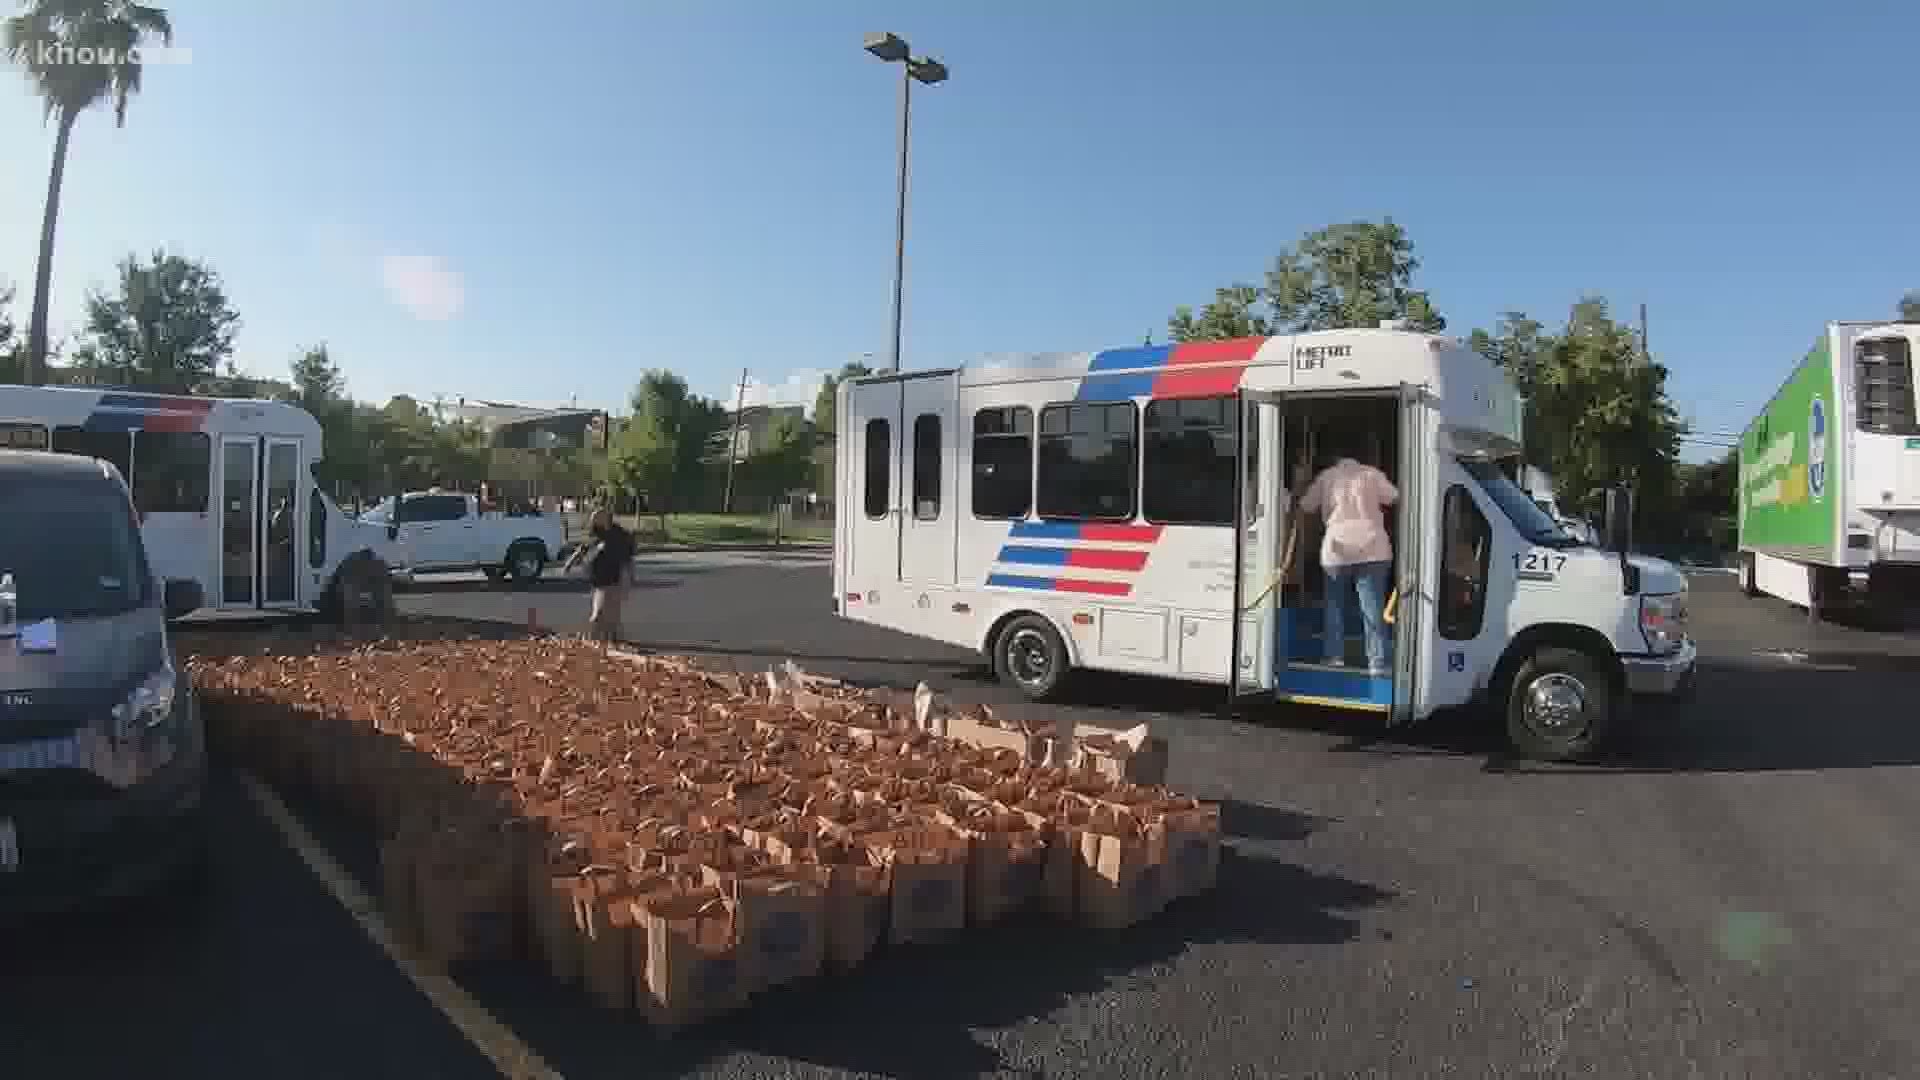 Hundreds of bags of groceries were delivered to families in need in southeast Houston Wednesday morning after their neighborhood grocery store burned down.